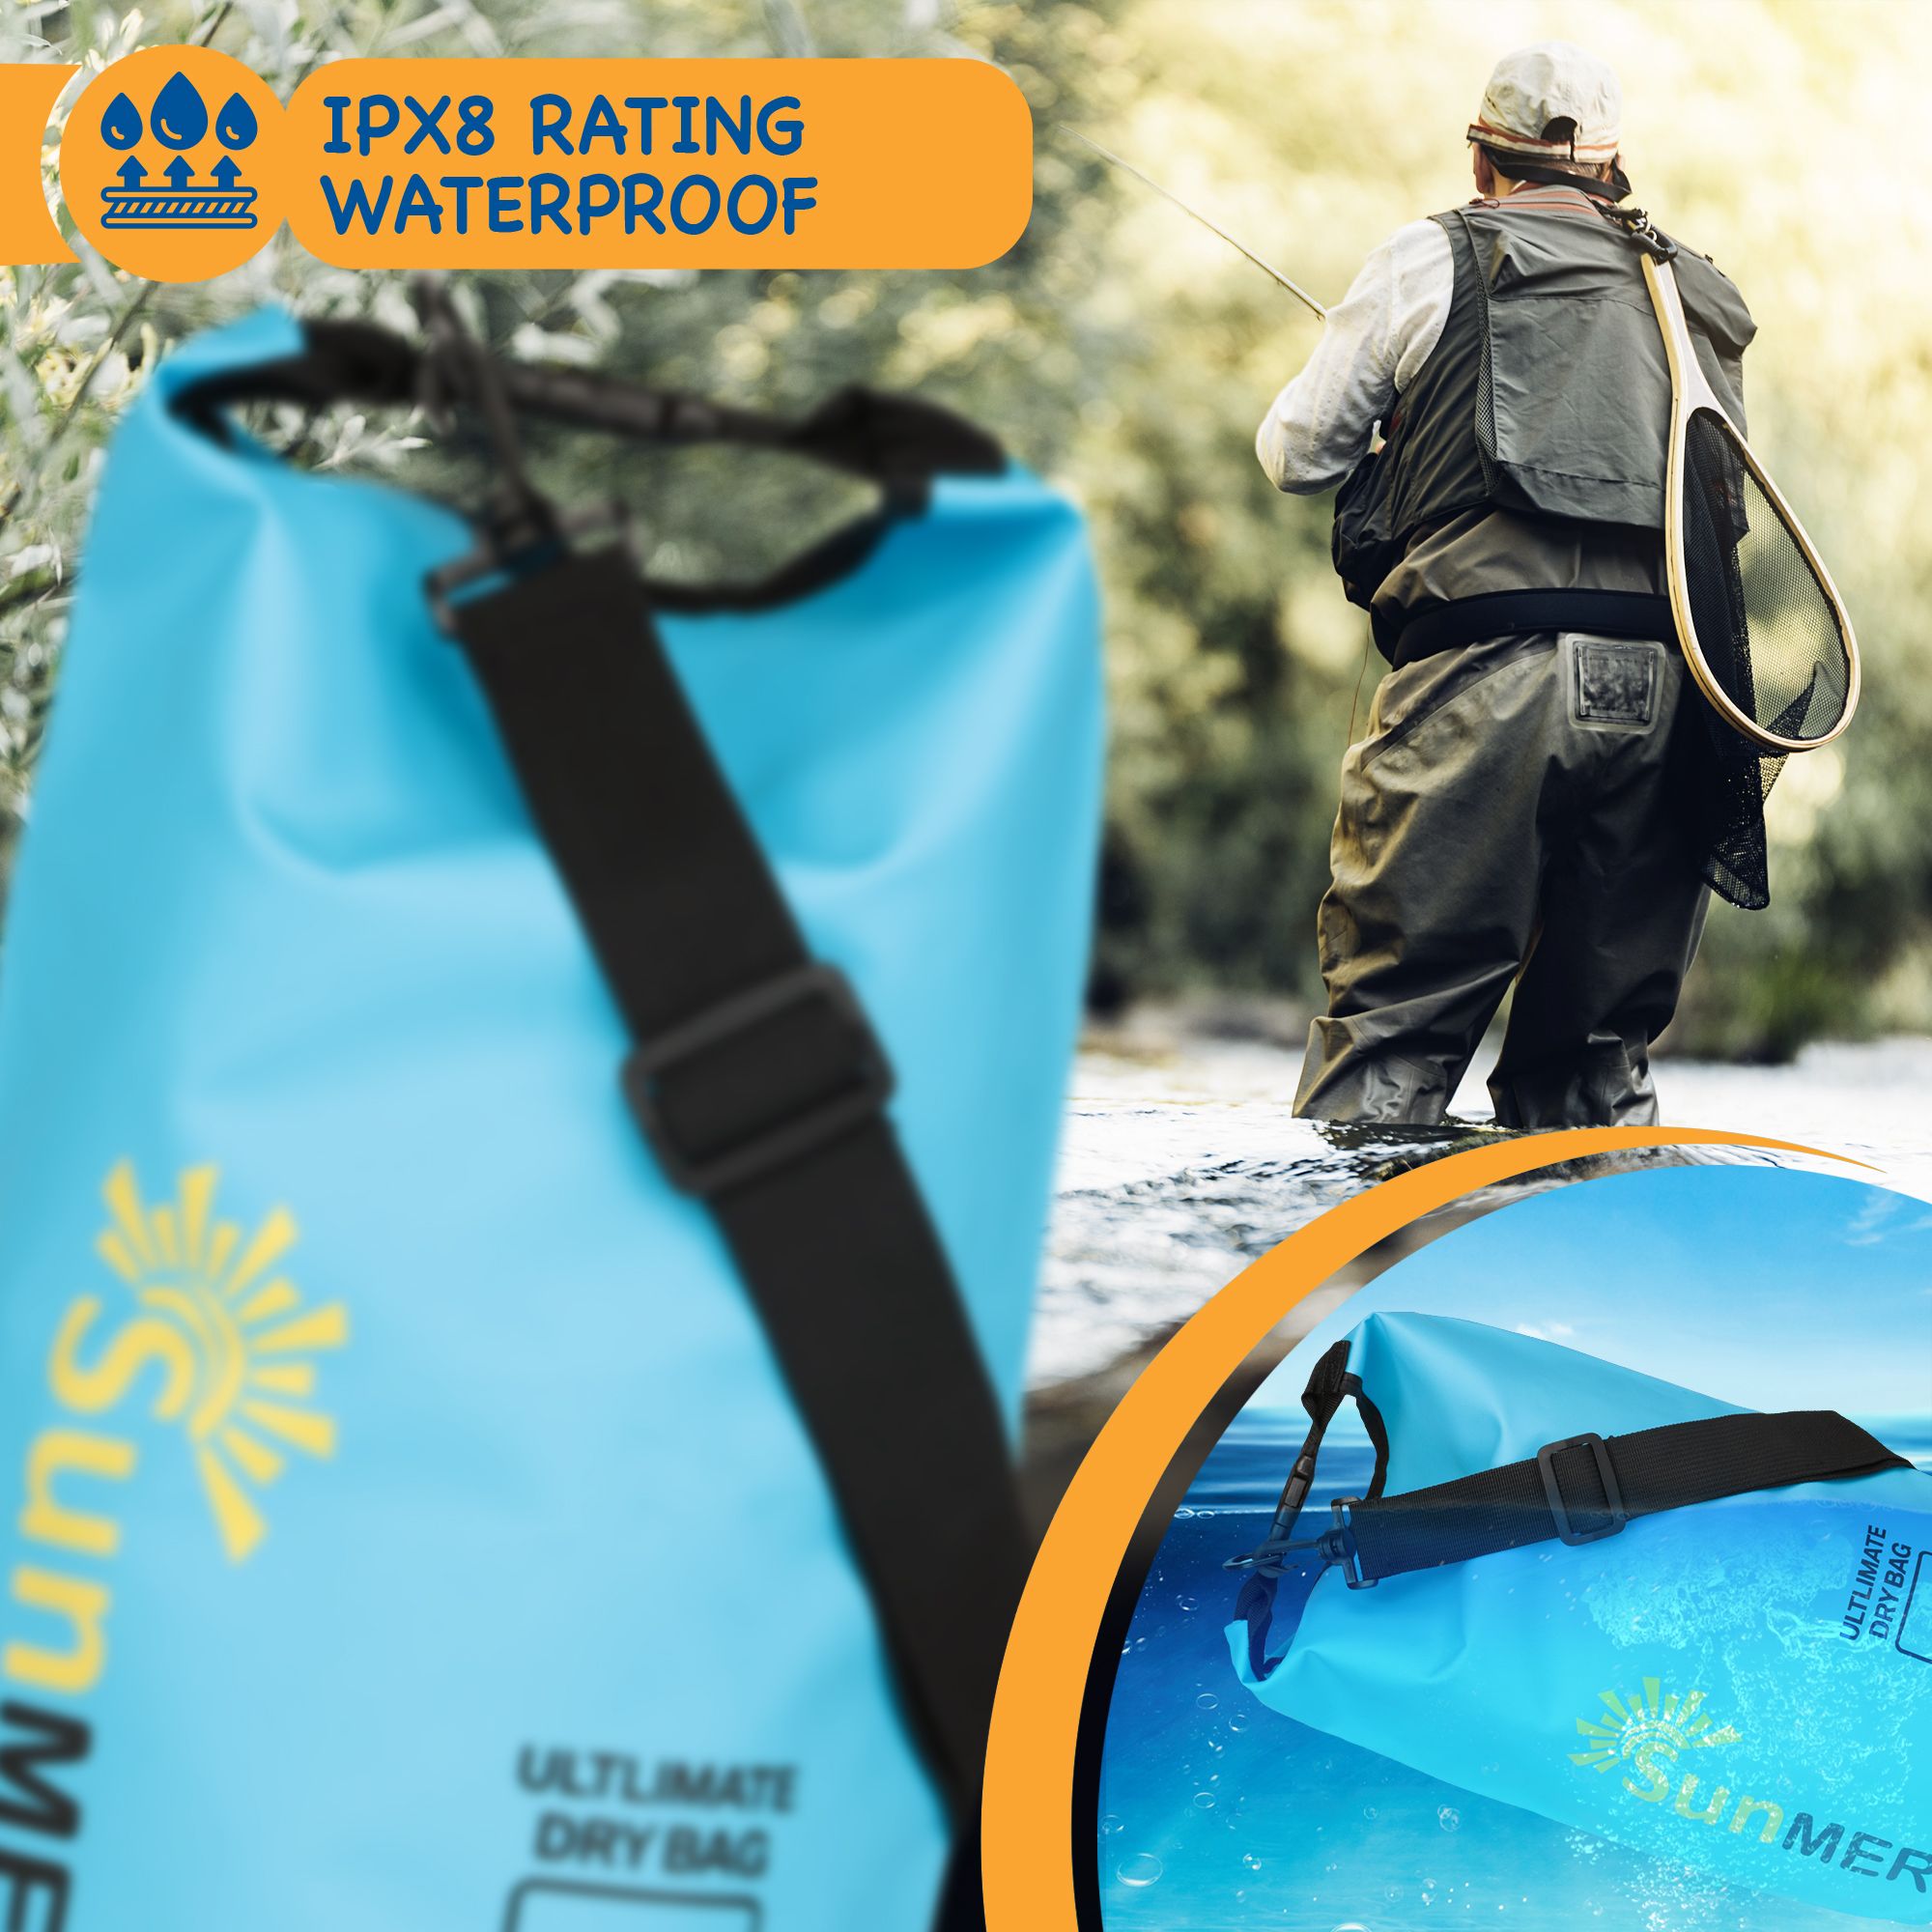 SUNMER 5L Dry Bag With Waterproof Phone Case - Blue